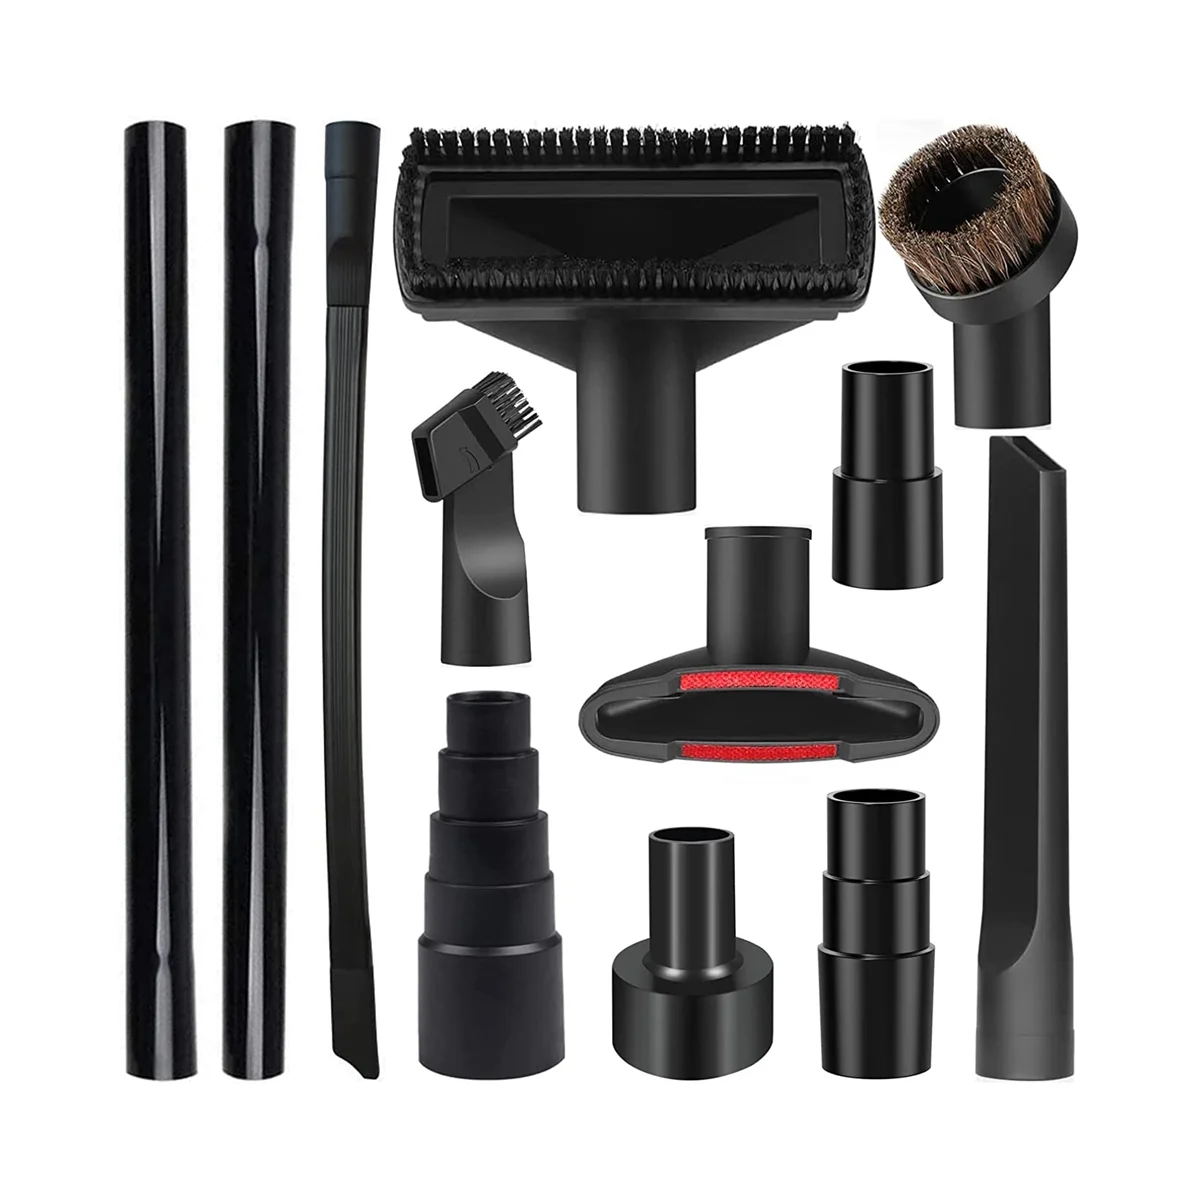 

12PCS Universal Vacuum Attachment Kit Wet Dry Plastic Vacuum Hose Adapter Extension Wand Flexible Crevice Tool Adapter